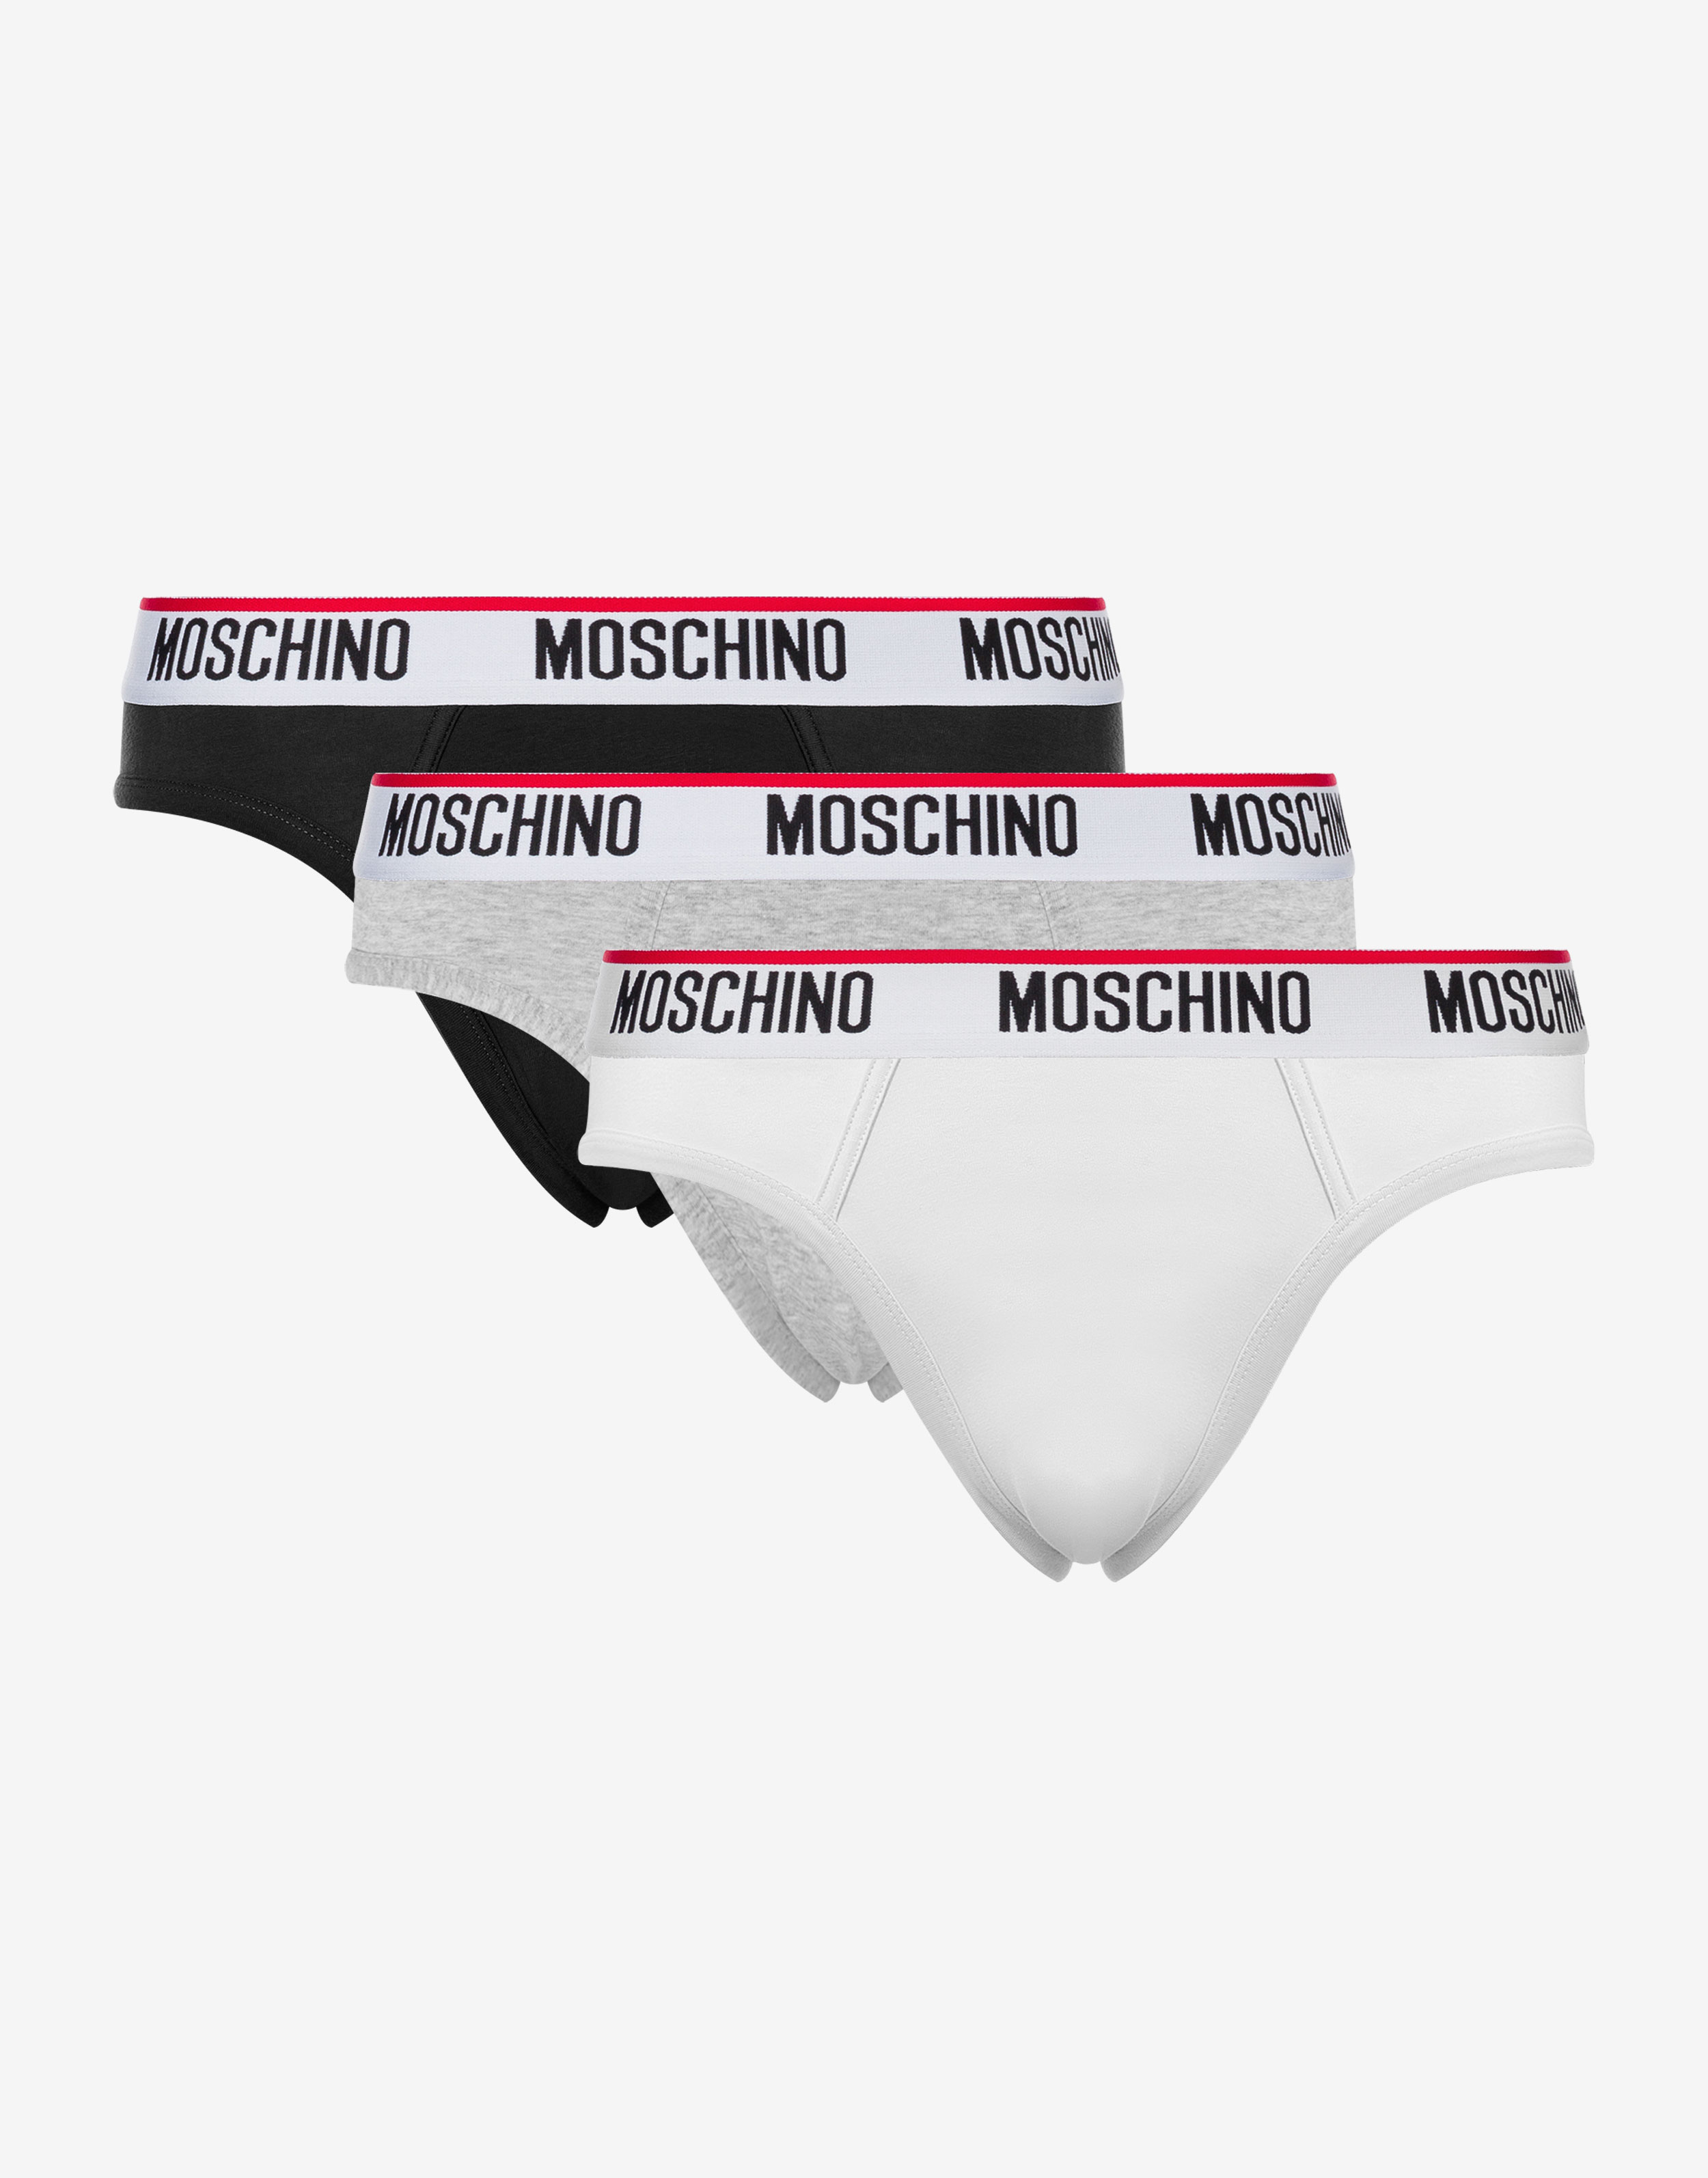 Moschino Underwear for Men - Official Store